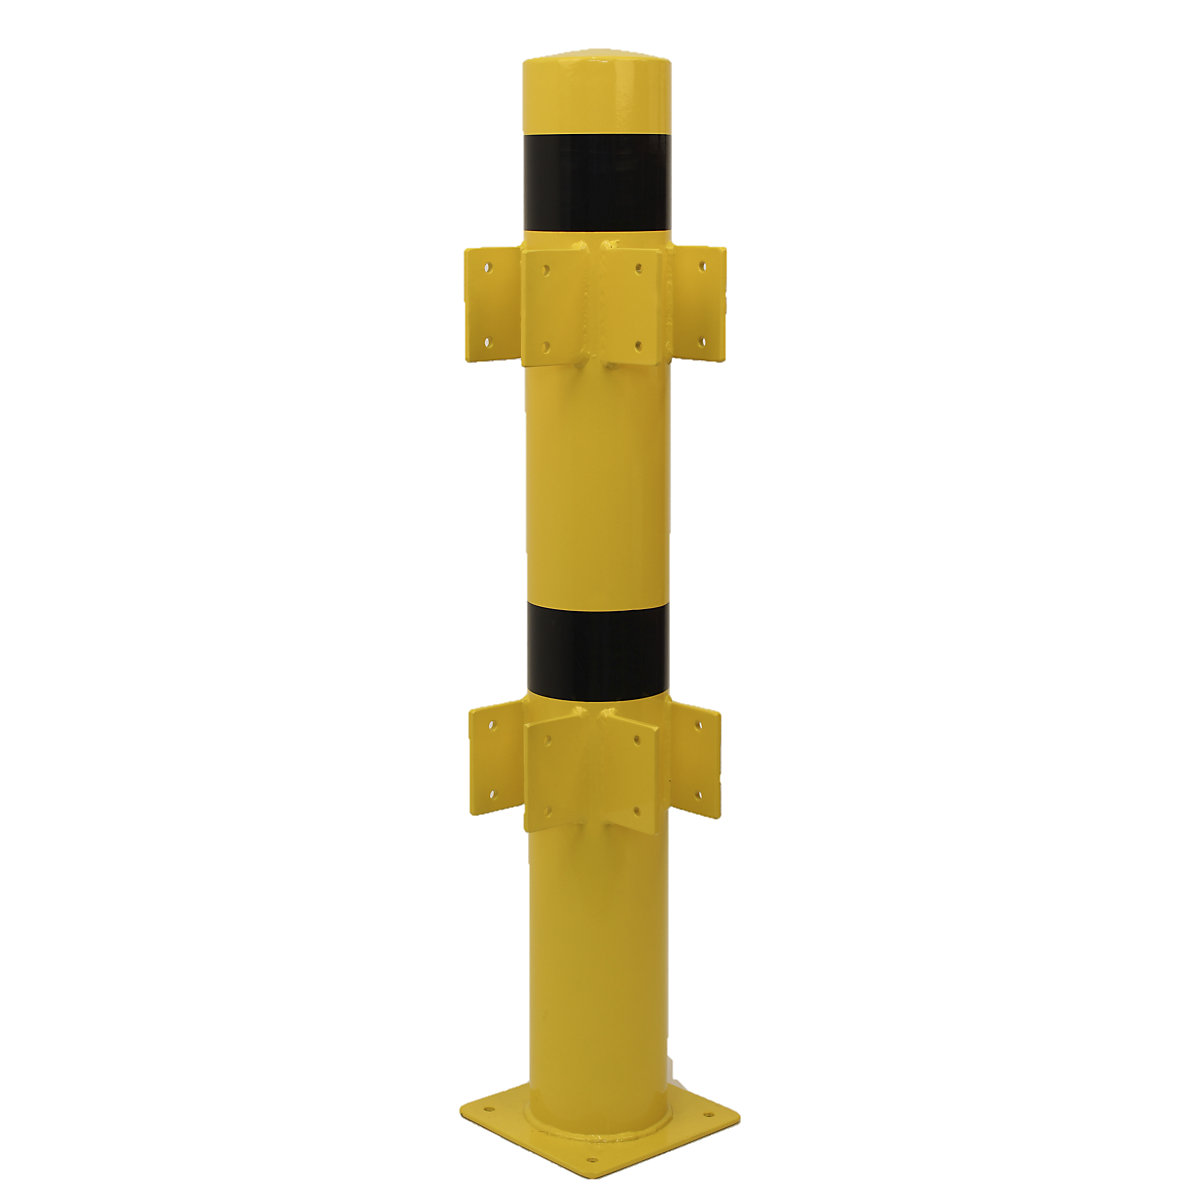 XL corner post for safety railings